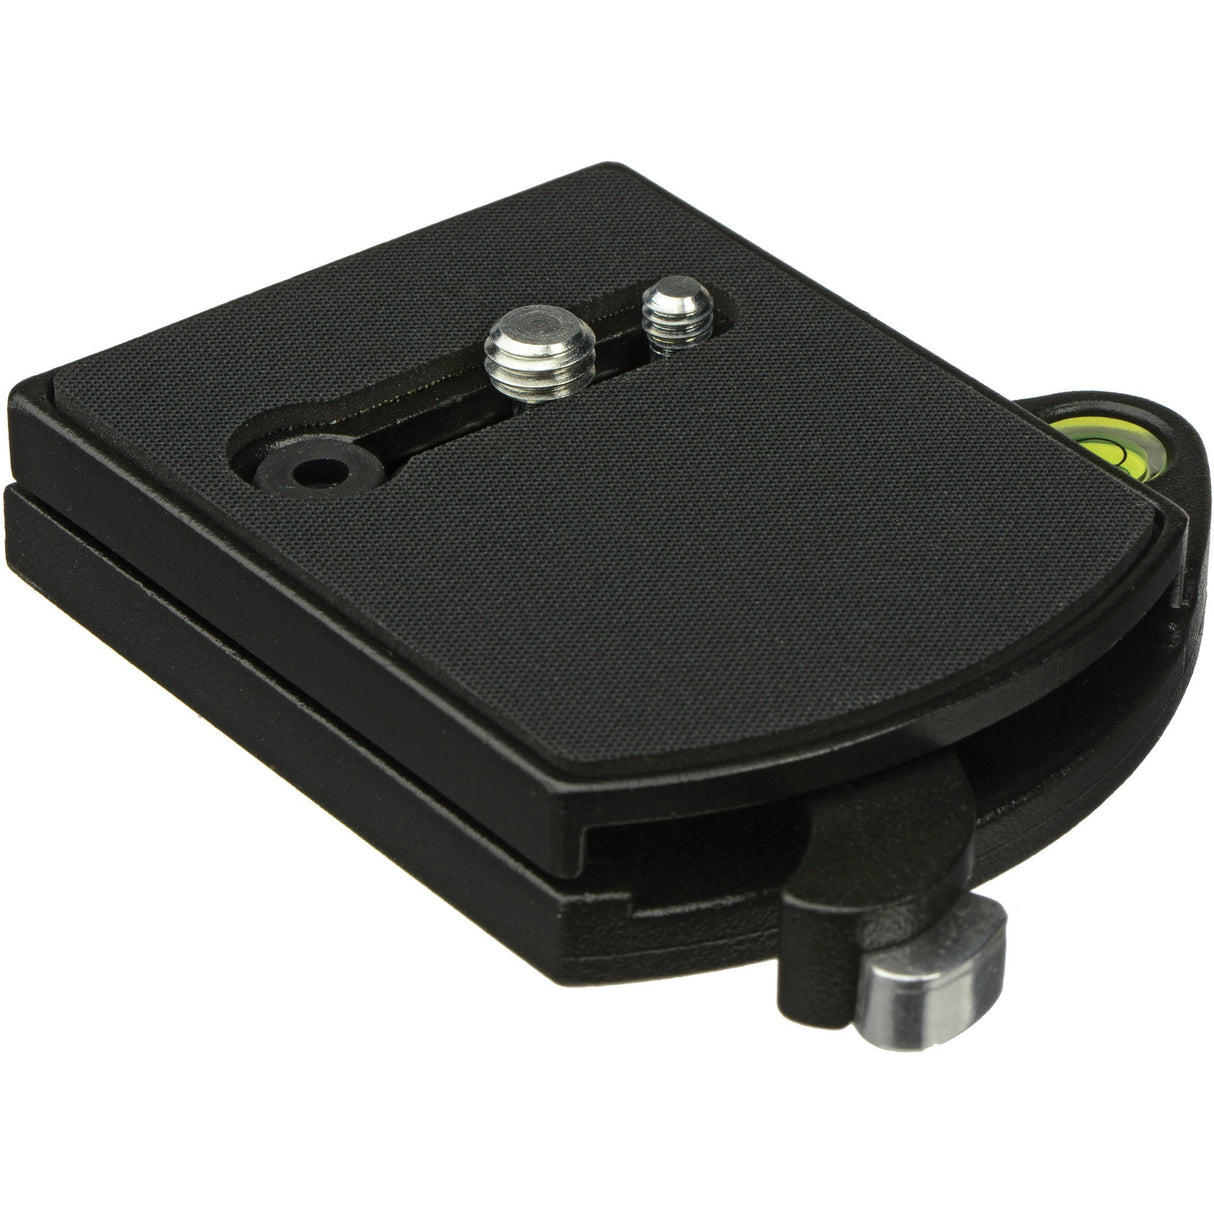 Manfrotto 394 Low Profile Quick Release Adapter with 410PL Plate